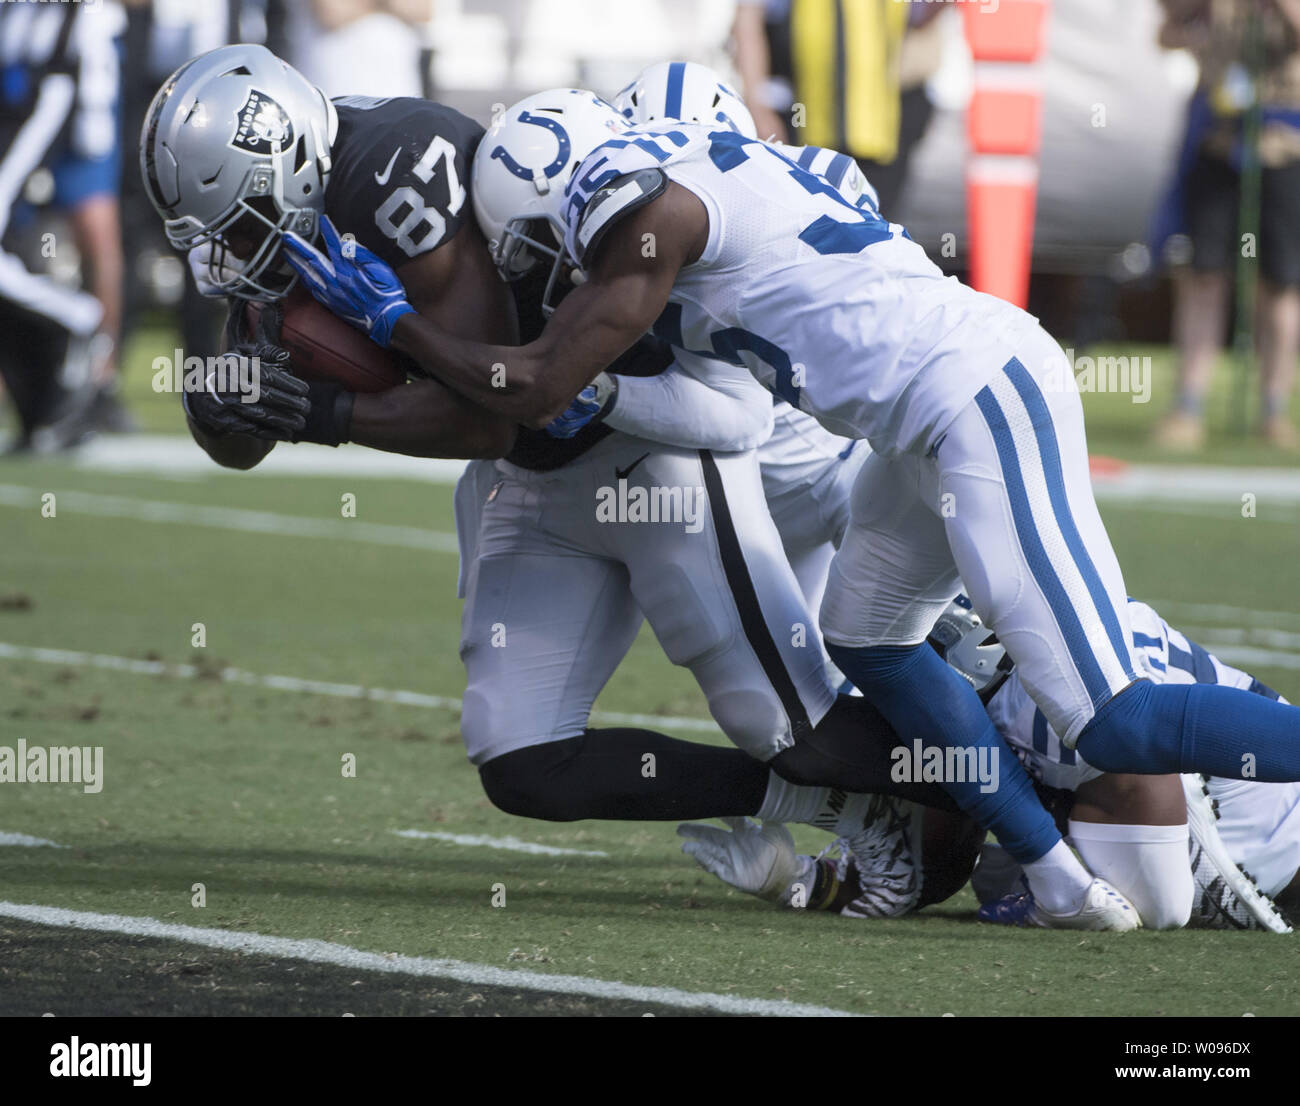 Oakland Raiders tight end Jared Cook (87) powers over the goal line for a 25 yard TD pass from QB Derek Carr in the second quarter against the Indianapolis Colts  at the Coliseum Oakland, California on October 28, 2018. The Colts defeated the Raiders 42-28.         Photo by Terry Schmitt/UPI Stock Photo